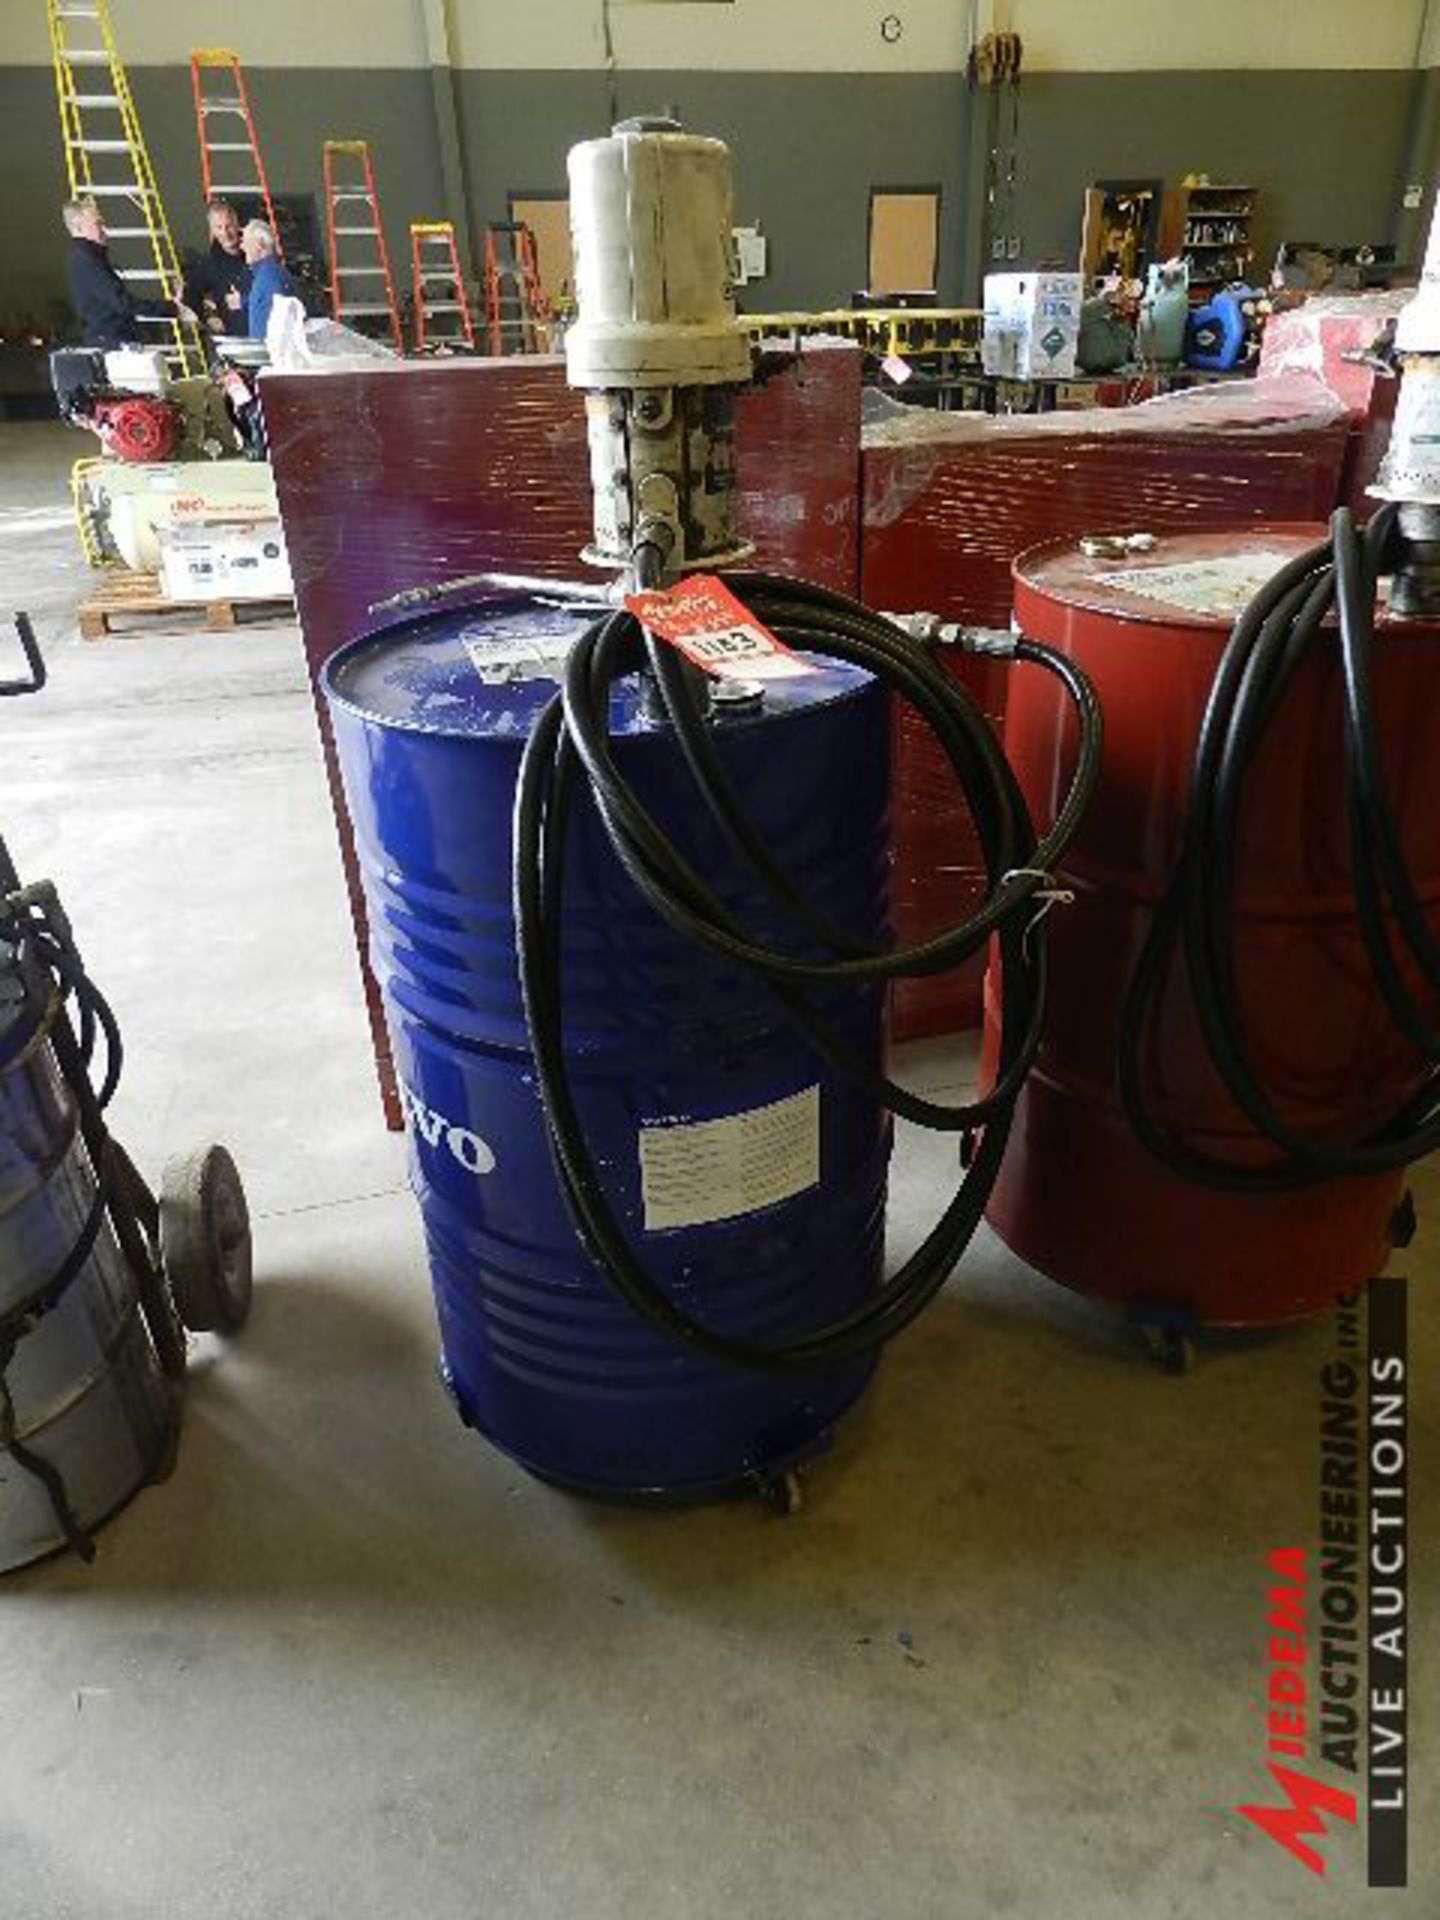 GRACO FIRE-BALL 300 PNEUMATIC PUMP WITH HOSE AND GUN WITH PARTIAL BARREL OF WET BRAKE OIL